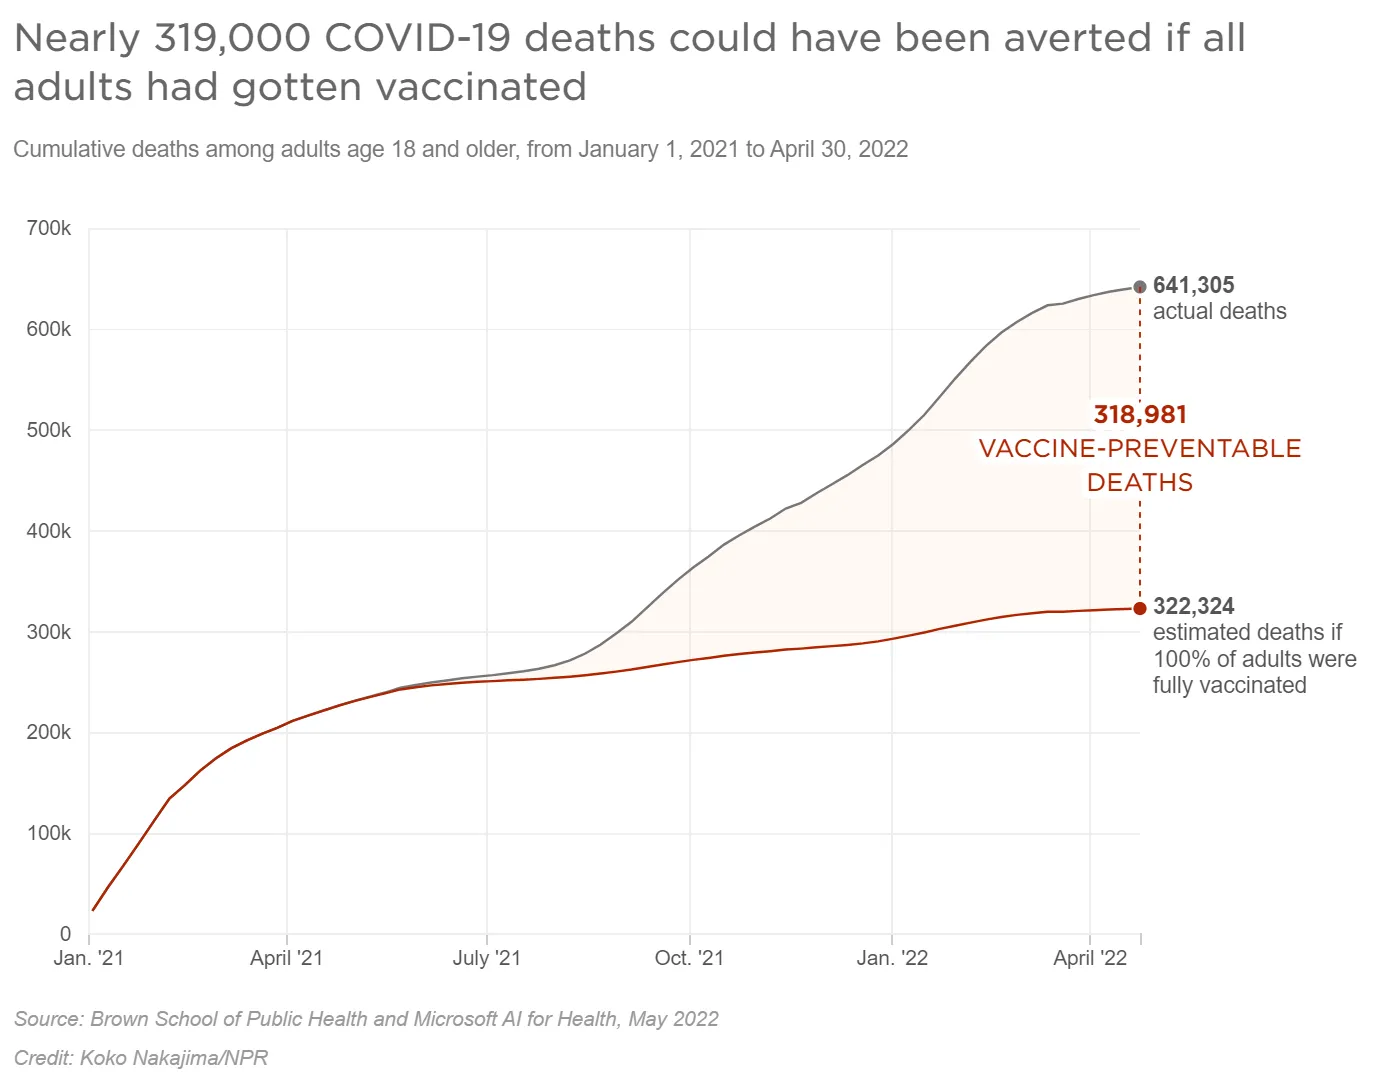 Nearly 319,000 COVID-19 deaths could have been averted if all adults had gotten vacinated.